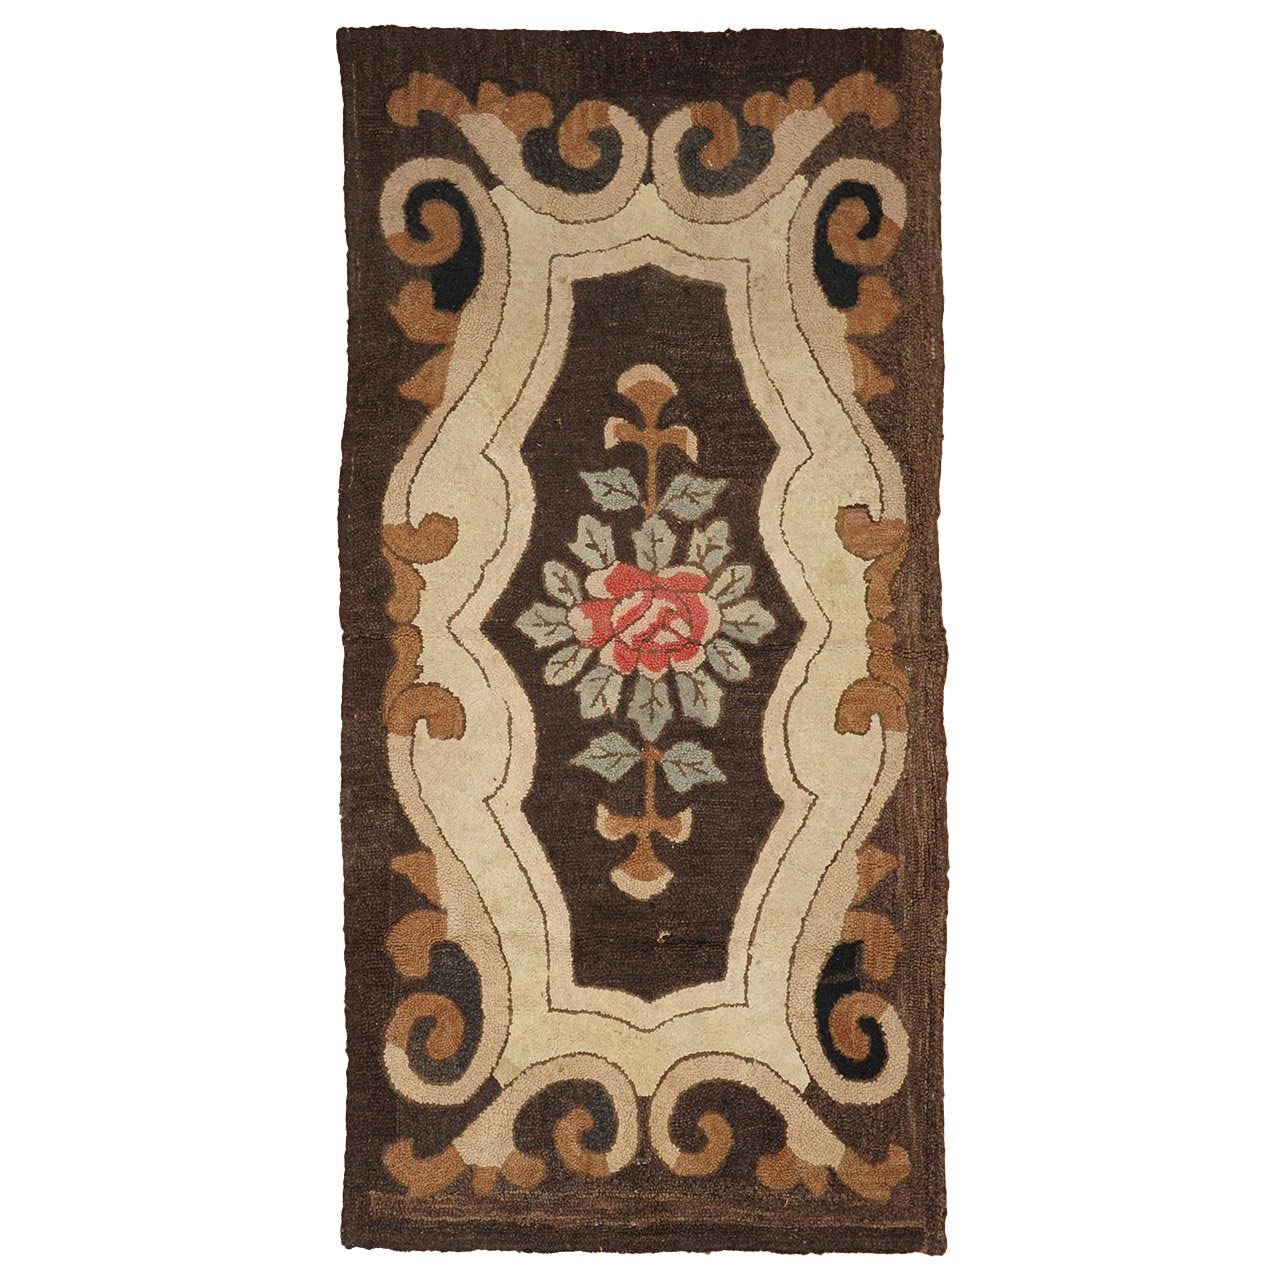 American Hooked Rug with Floral Decoration